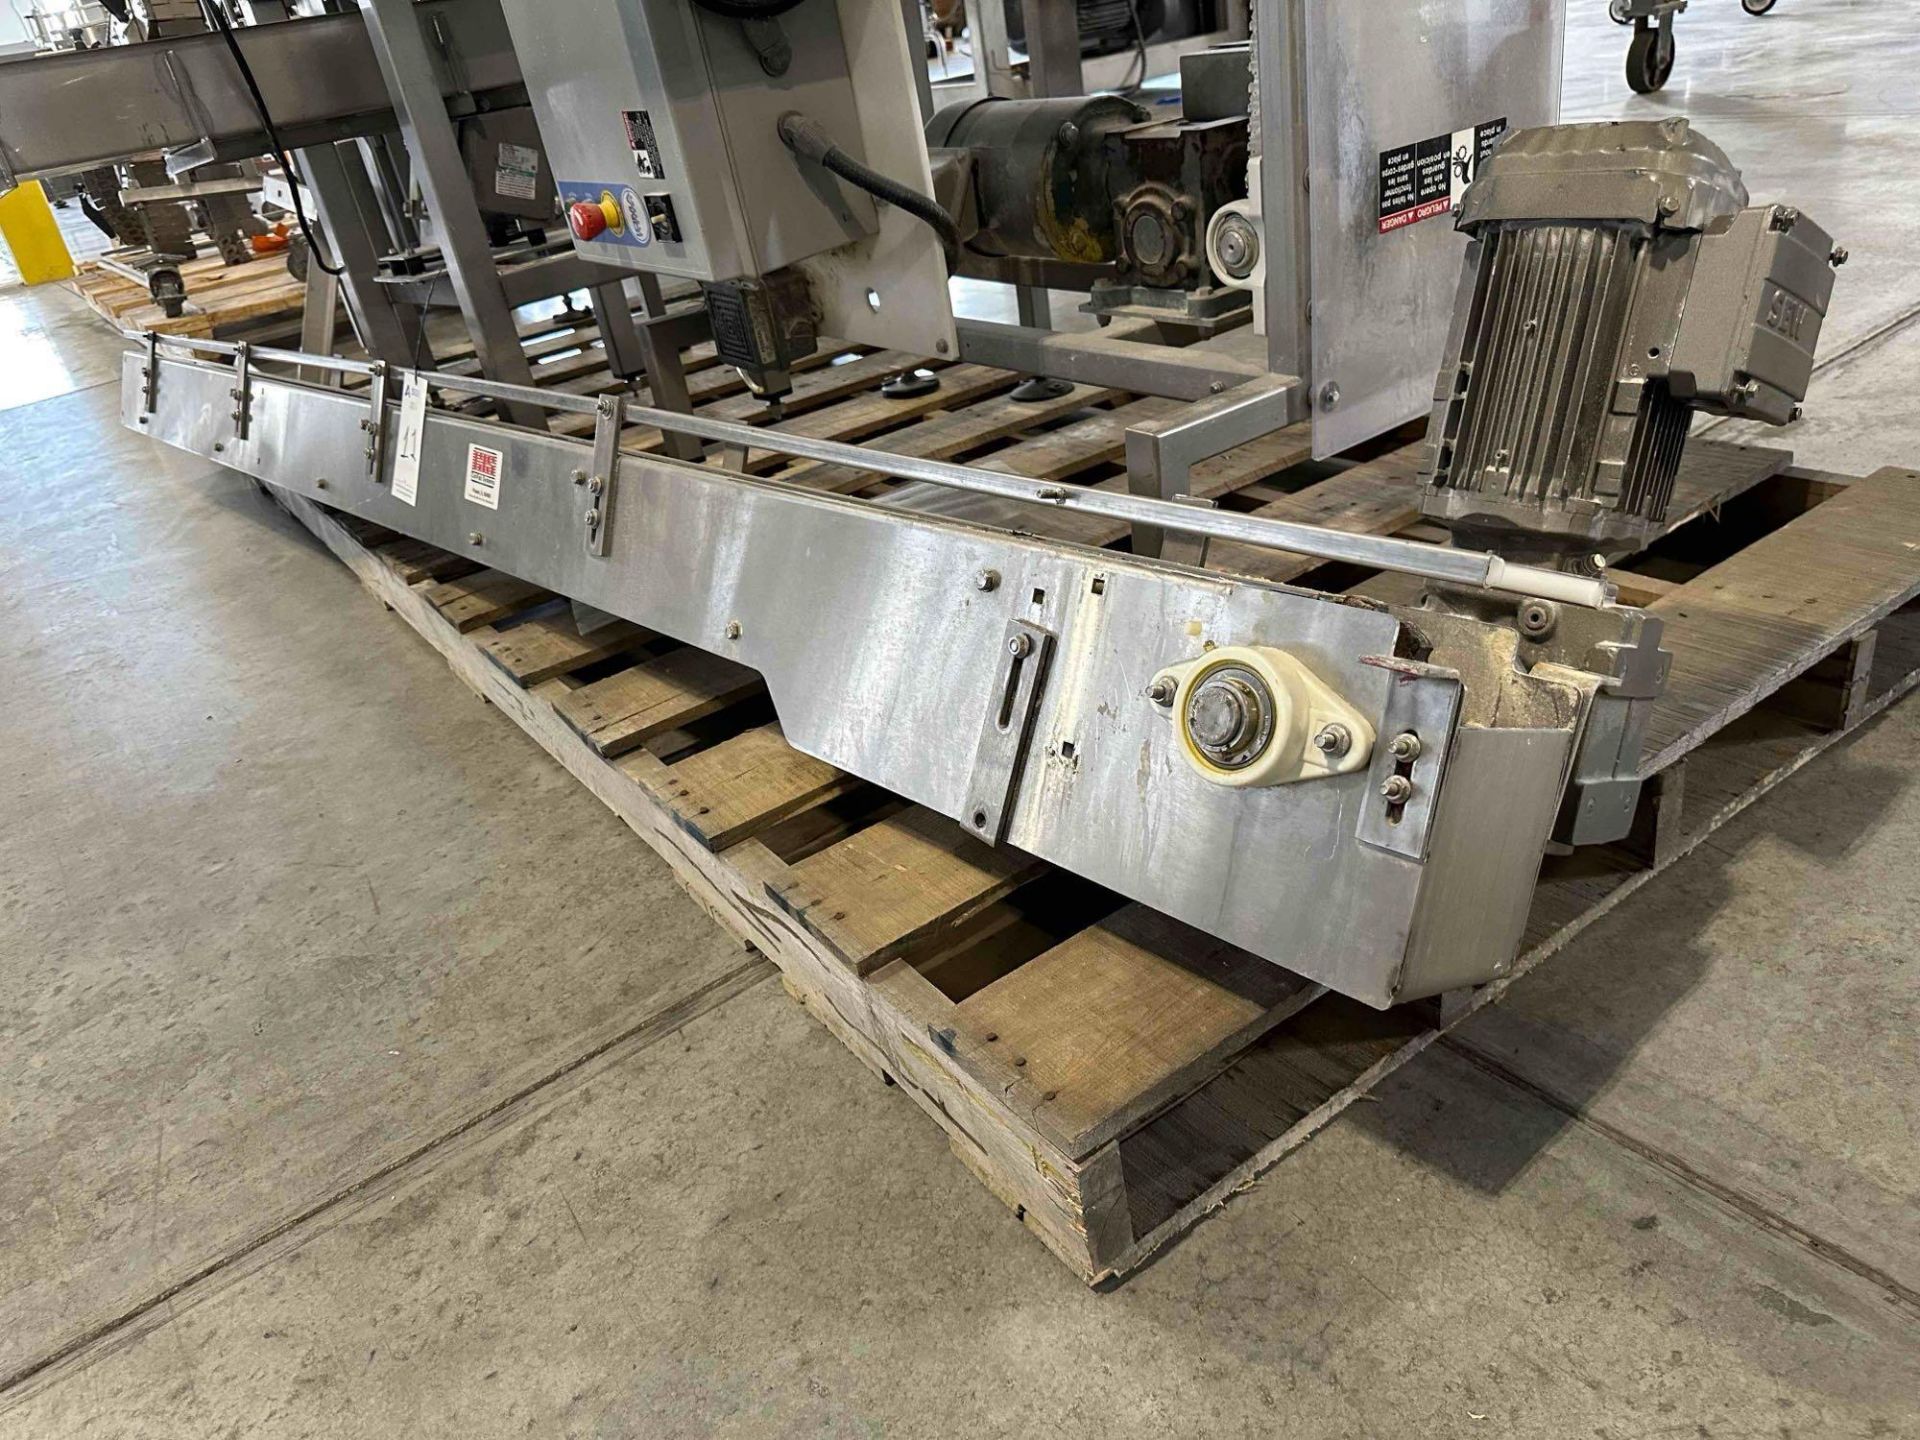 115" L by 4" W Stainless Steel conveyor